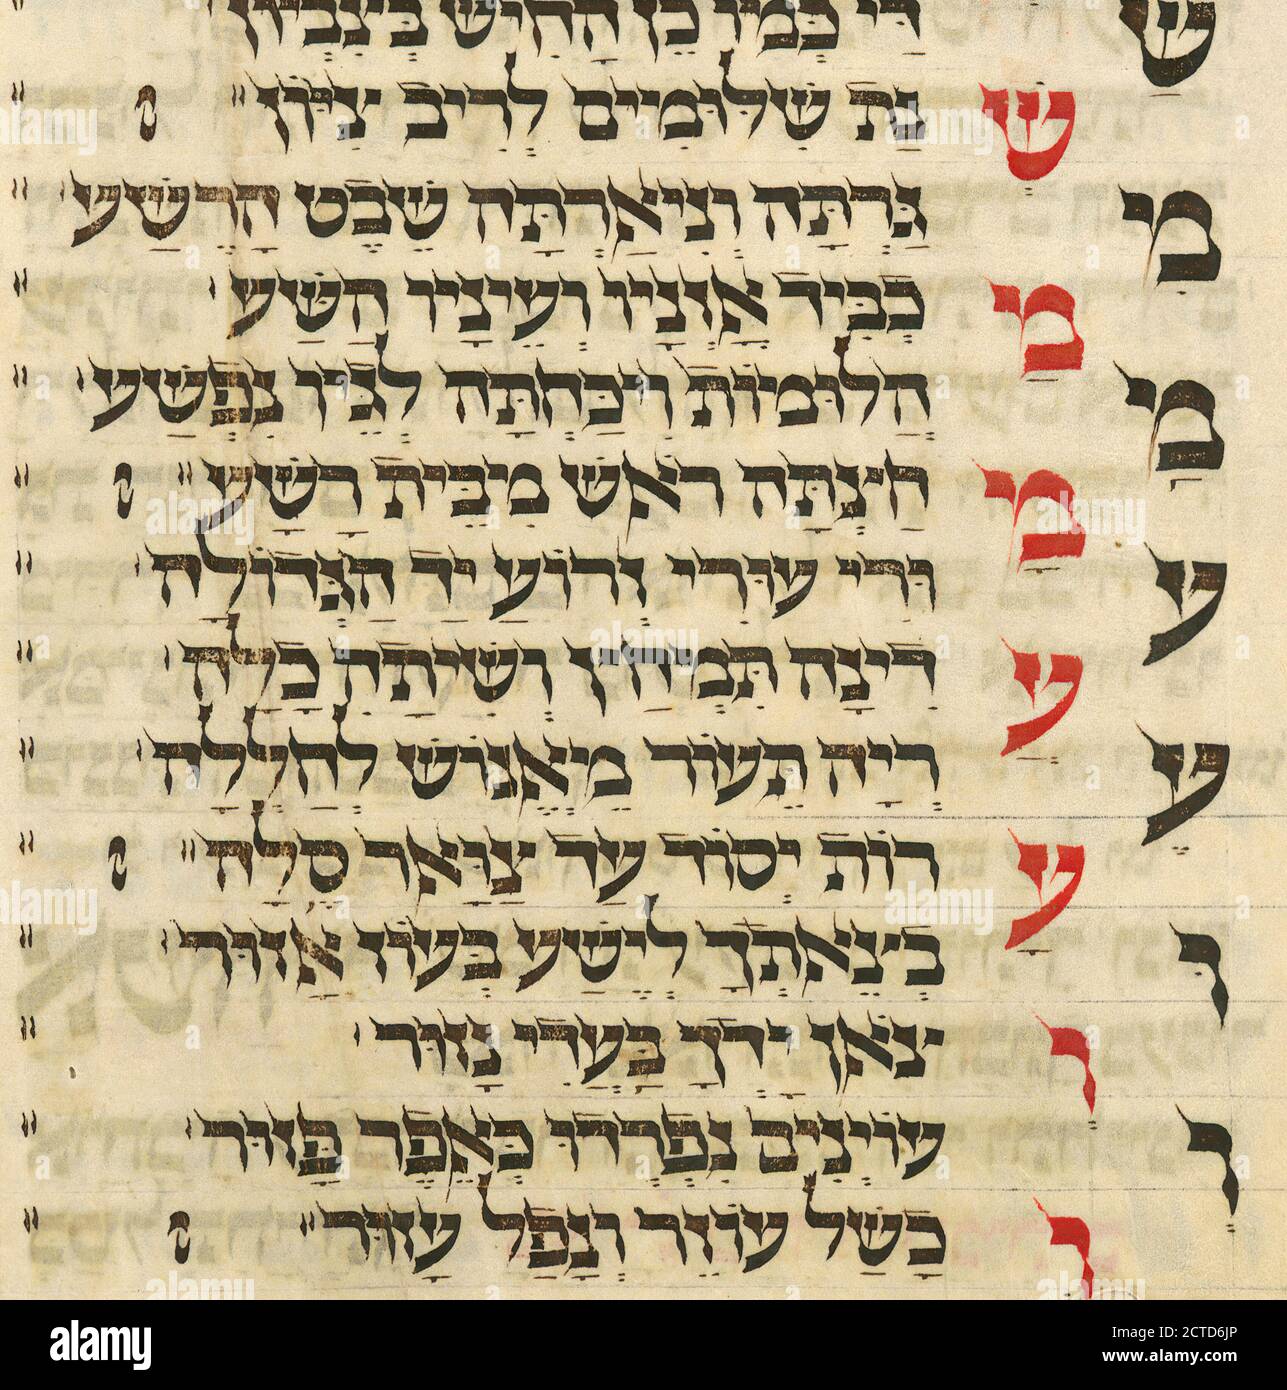 Piyut for eighth day of Passover cont.., still image, illuminated manuscripts, 1301 - 1400 Stock Photo